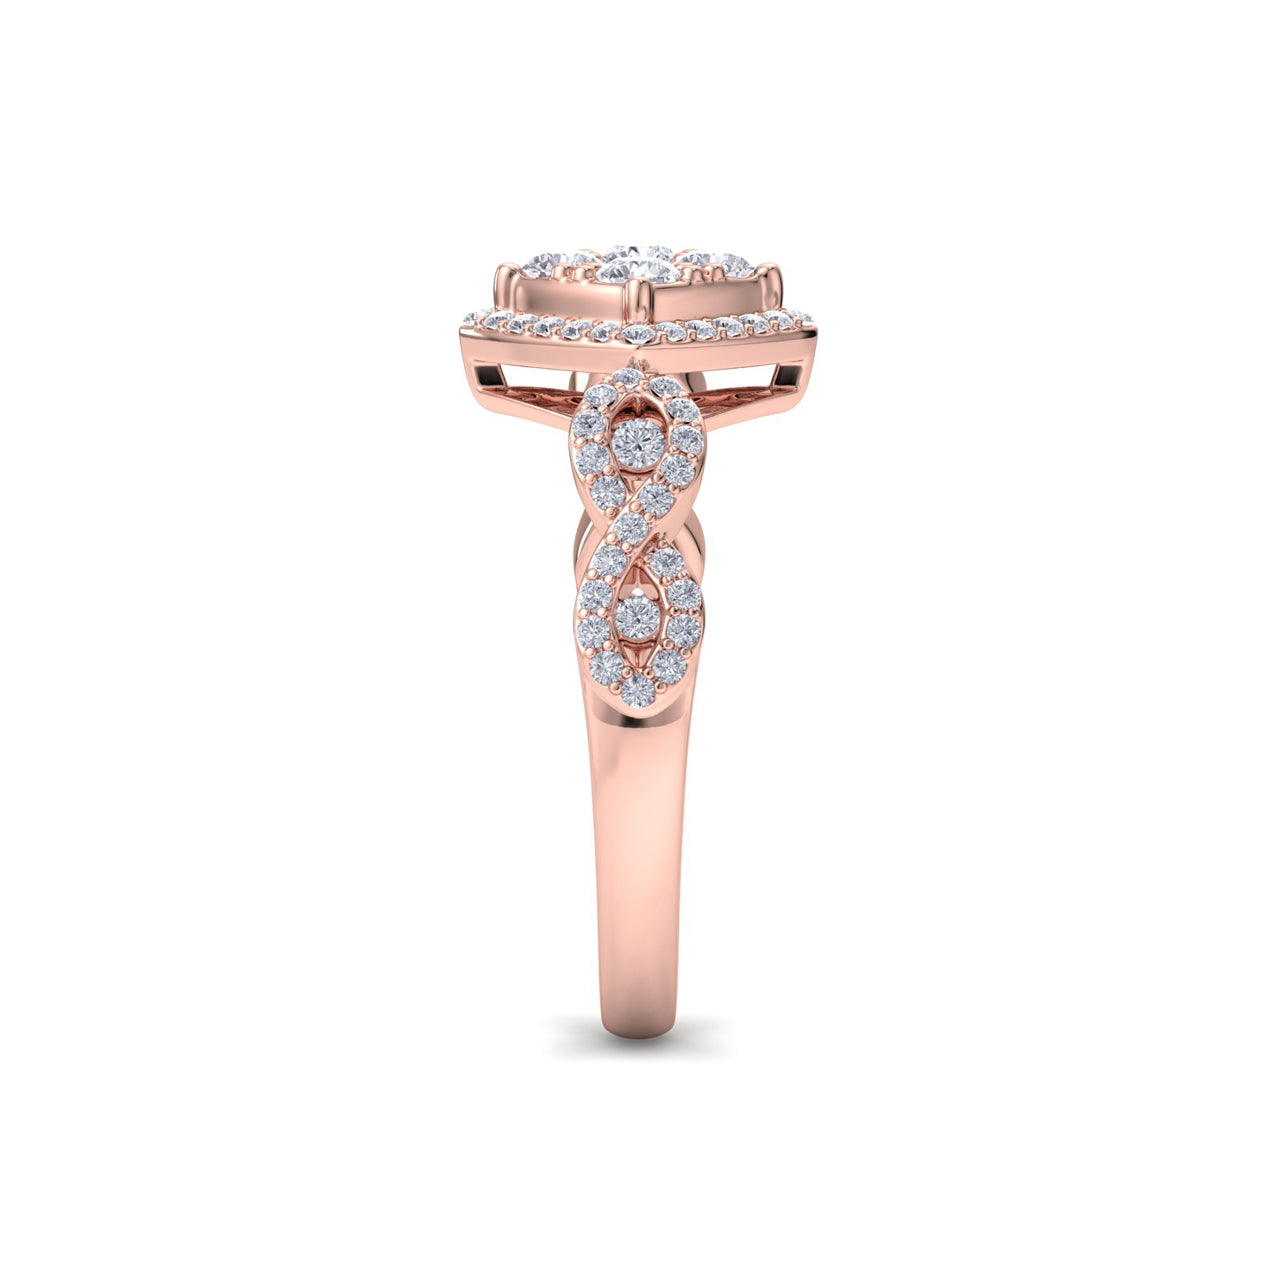 Diamond shaped halo ring in rose gold with white diamonds of 0.82 ct in weight